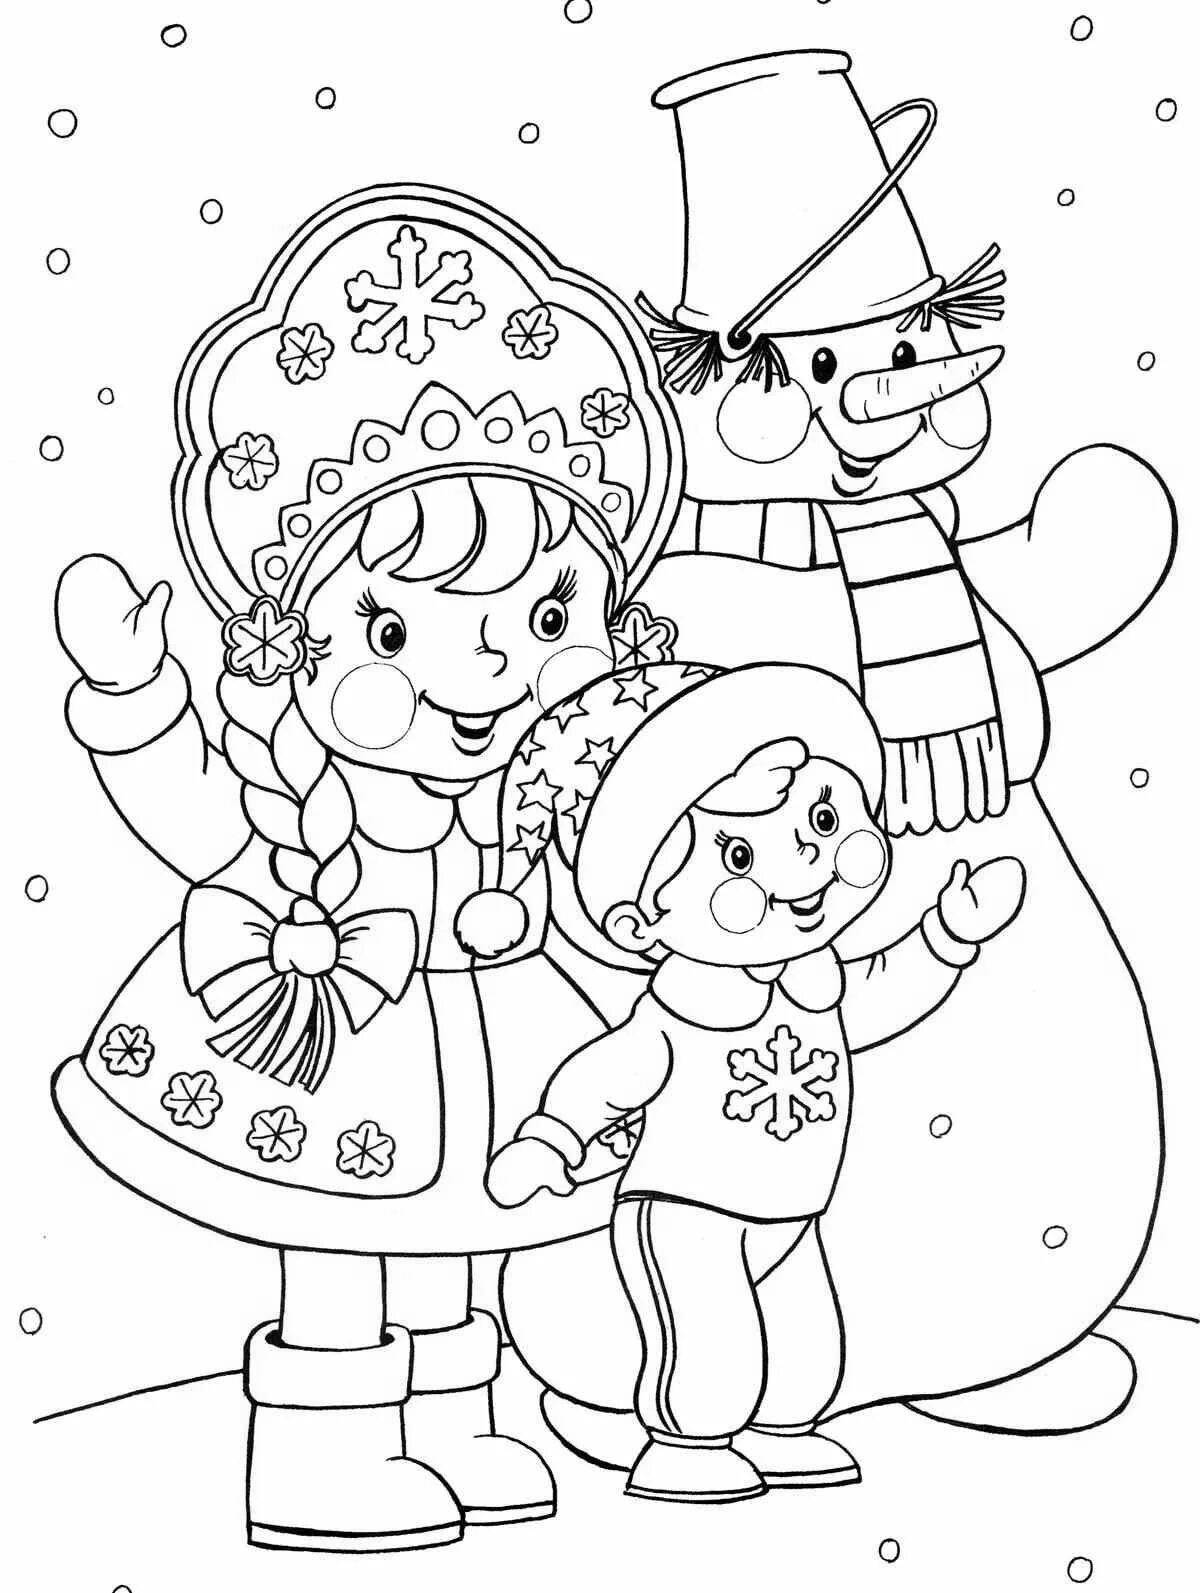 A fascinating Christmas coloring book